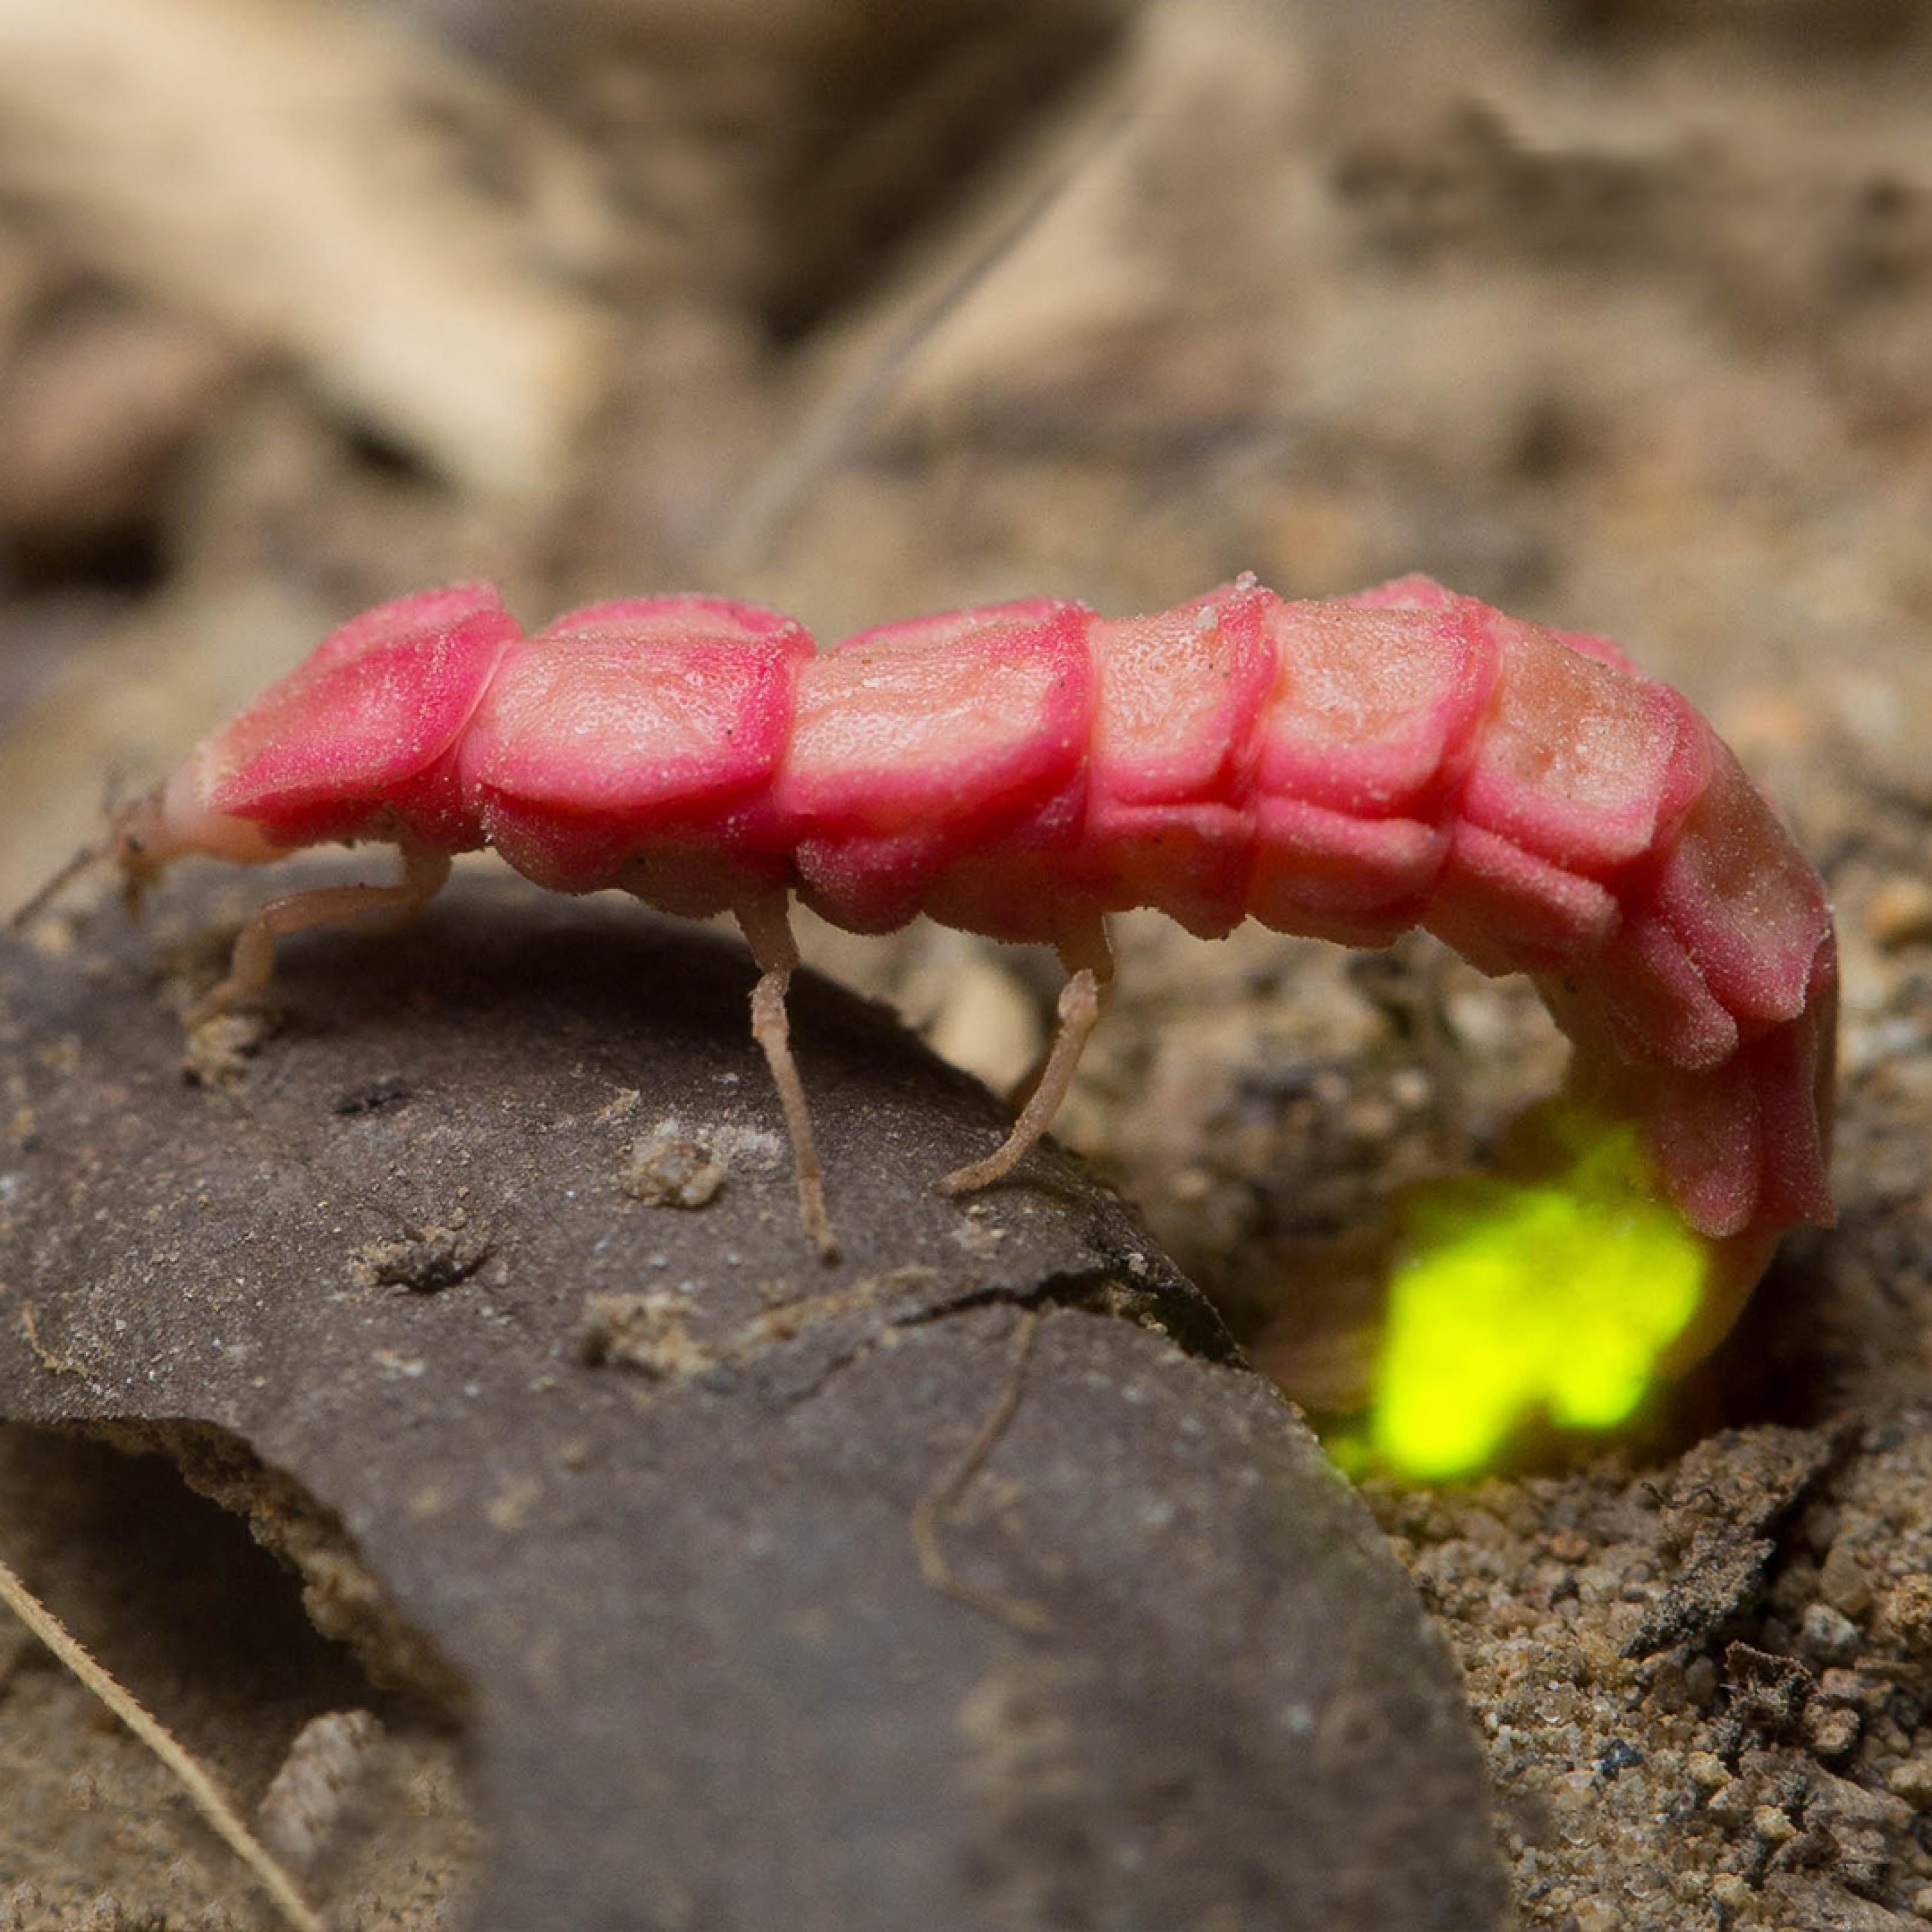 A pink, long, segmented insect (which looks somewhat like a gummy worm with legs) has a tail that is slightly curled under the rest of its body. The tip of the tail is glowing yellow-green.